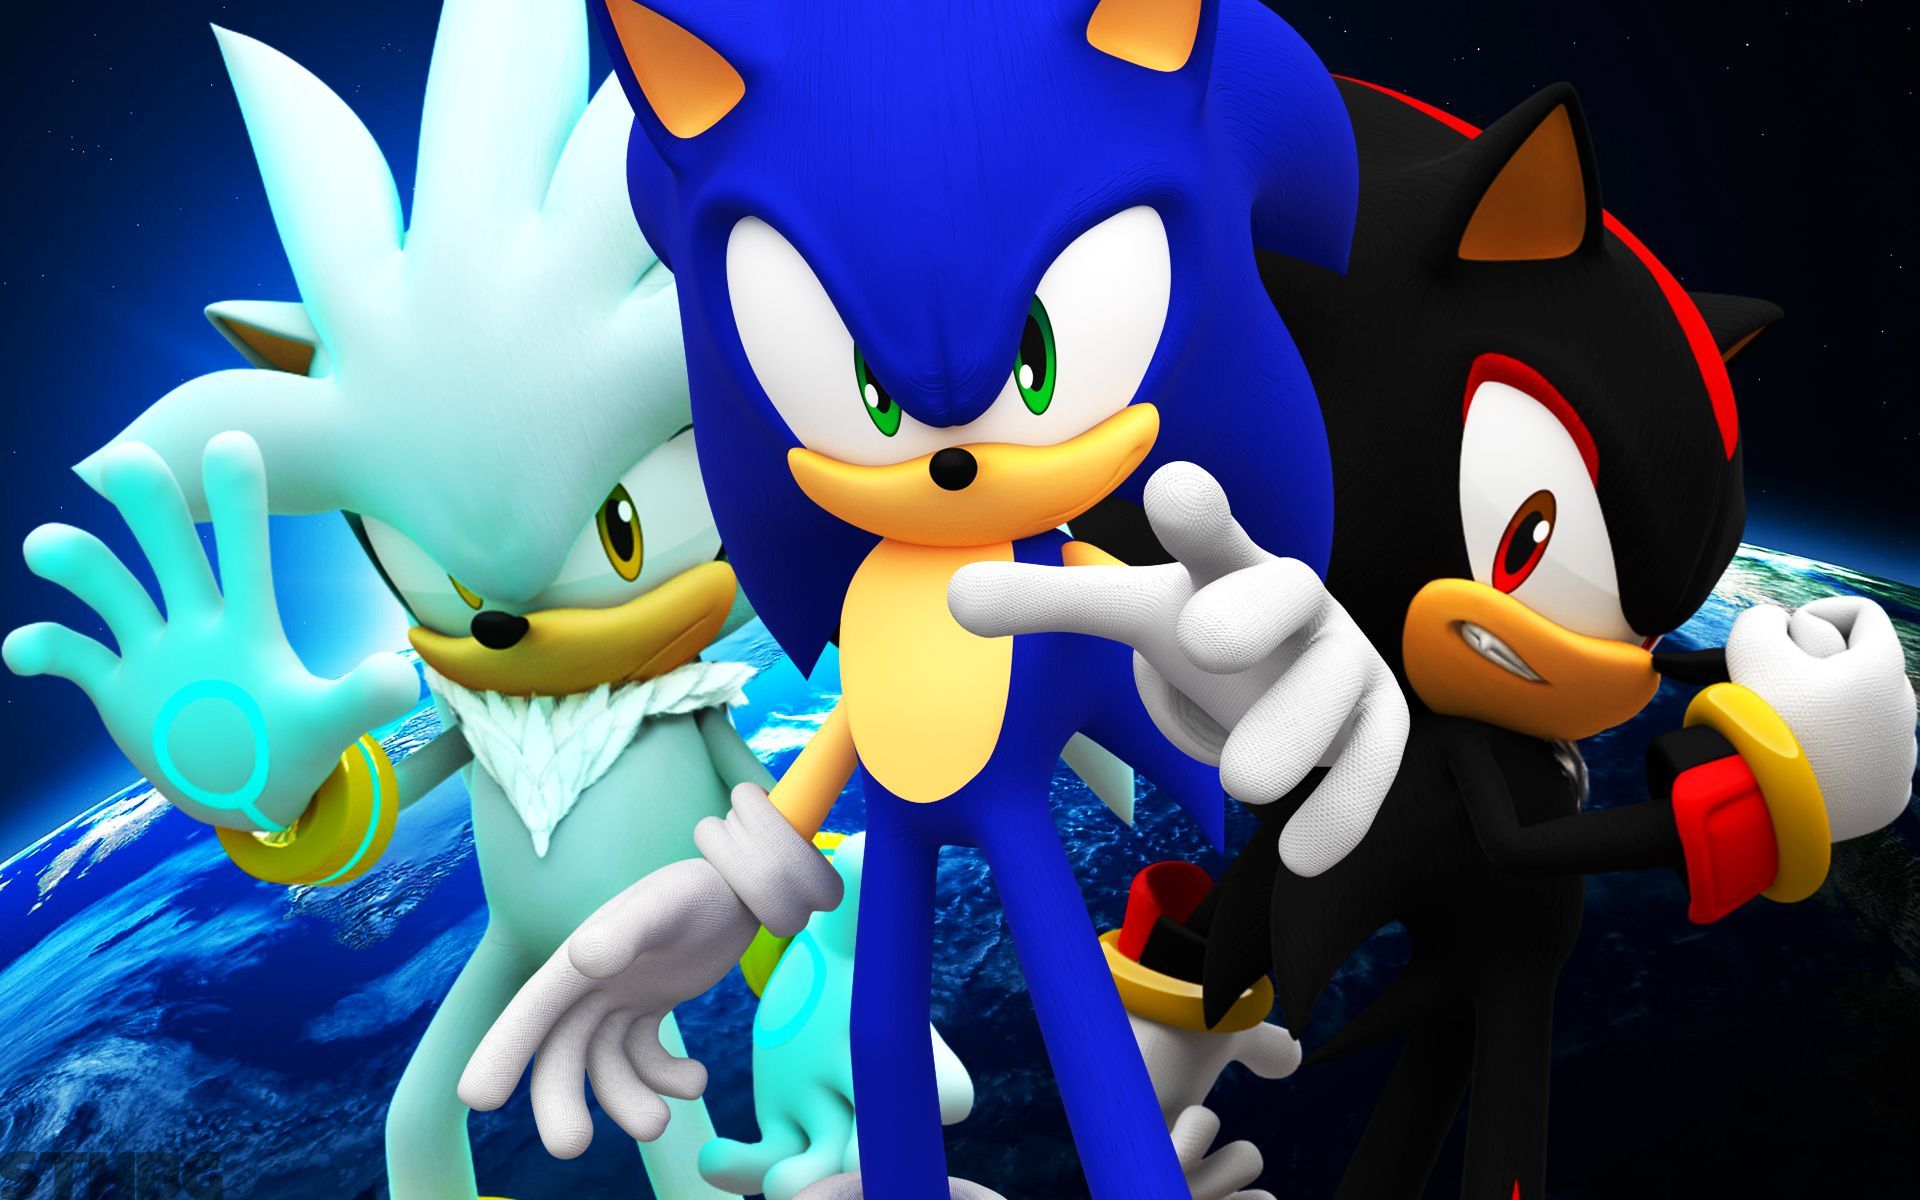 Sonic Shadow and Silver Wallpaper .wallpaperaccess.com